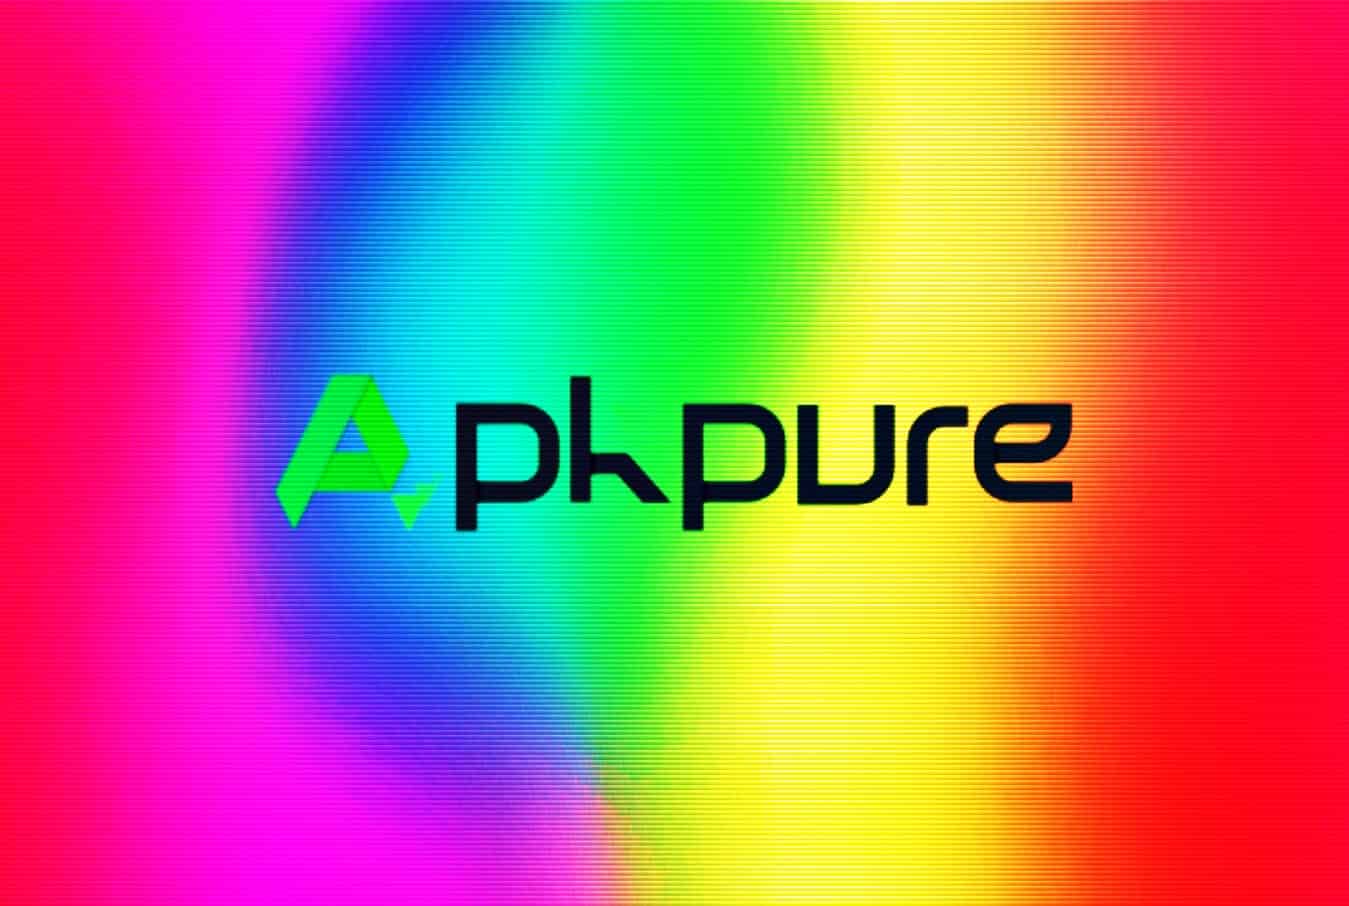 Android apps on APKPure store caught spreading malware